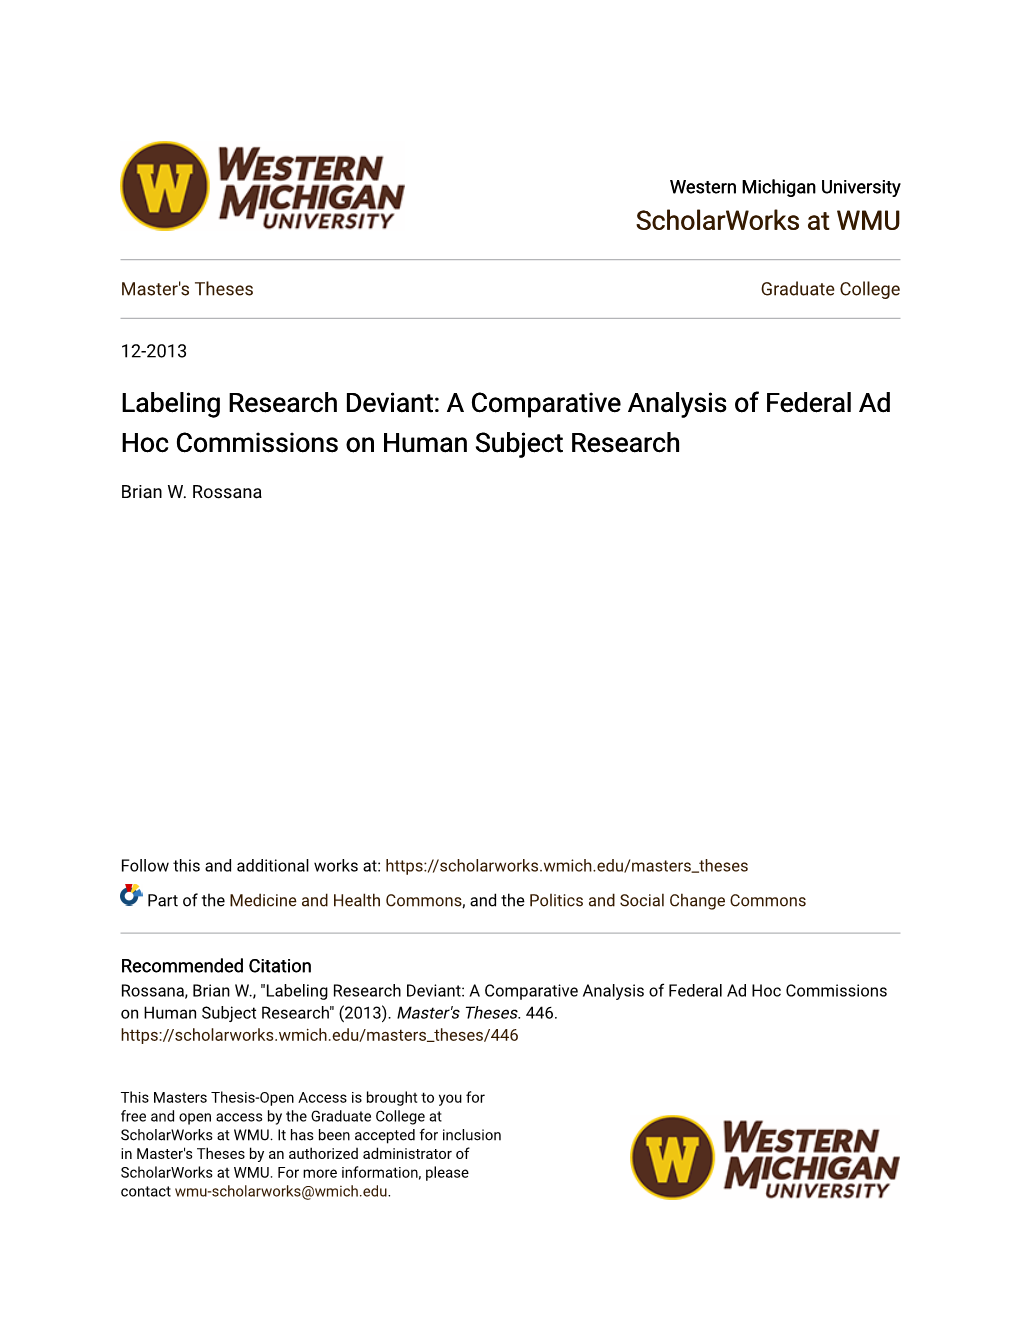 Labeling Research Deviant: a Comparative Analysis of Federal Ad Hoc Commissions on Human Subject Research